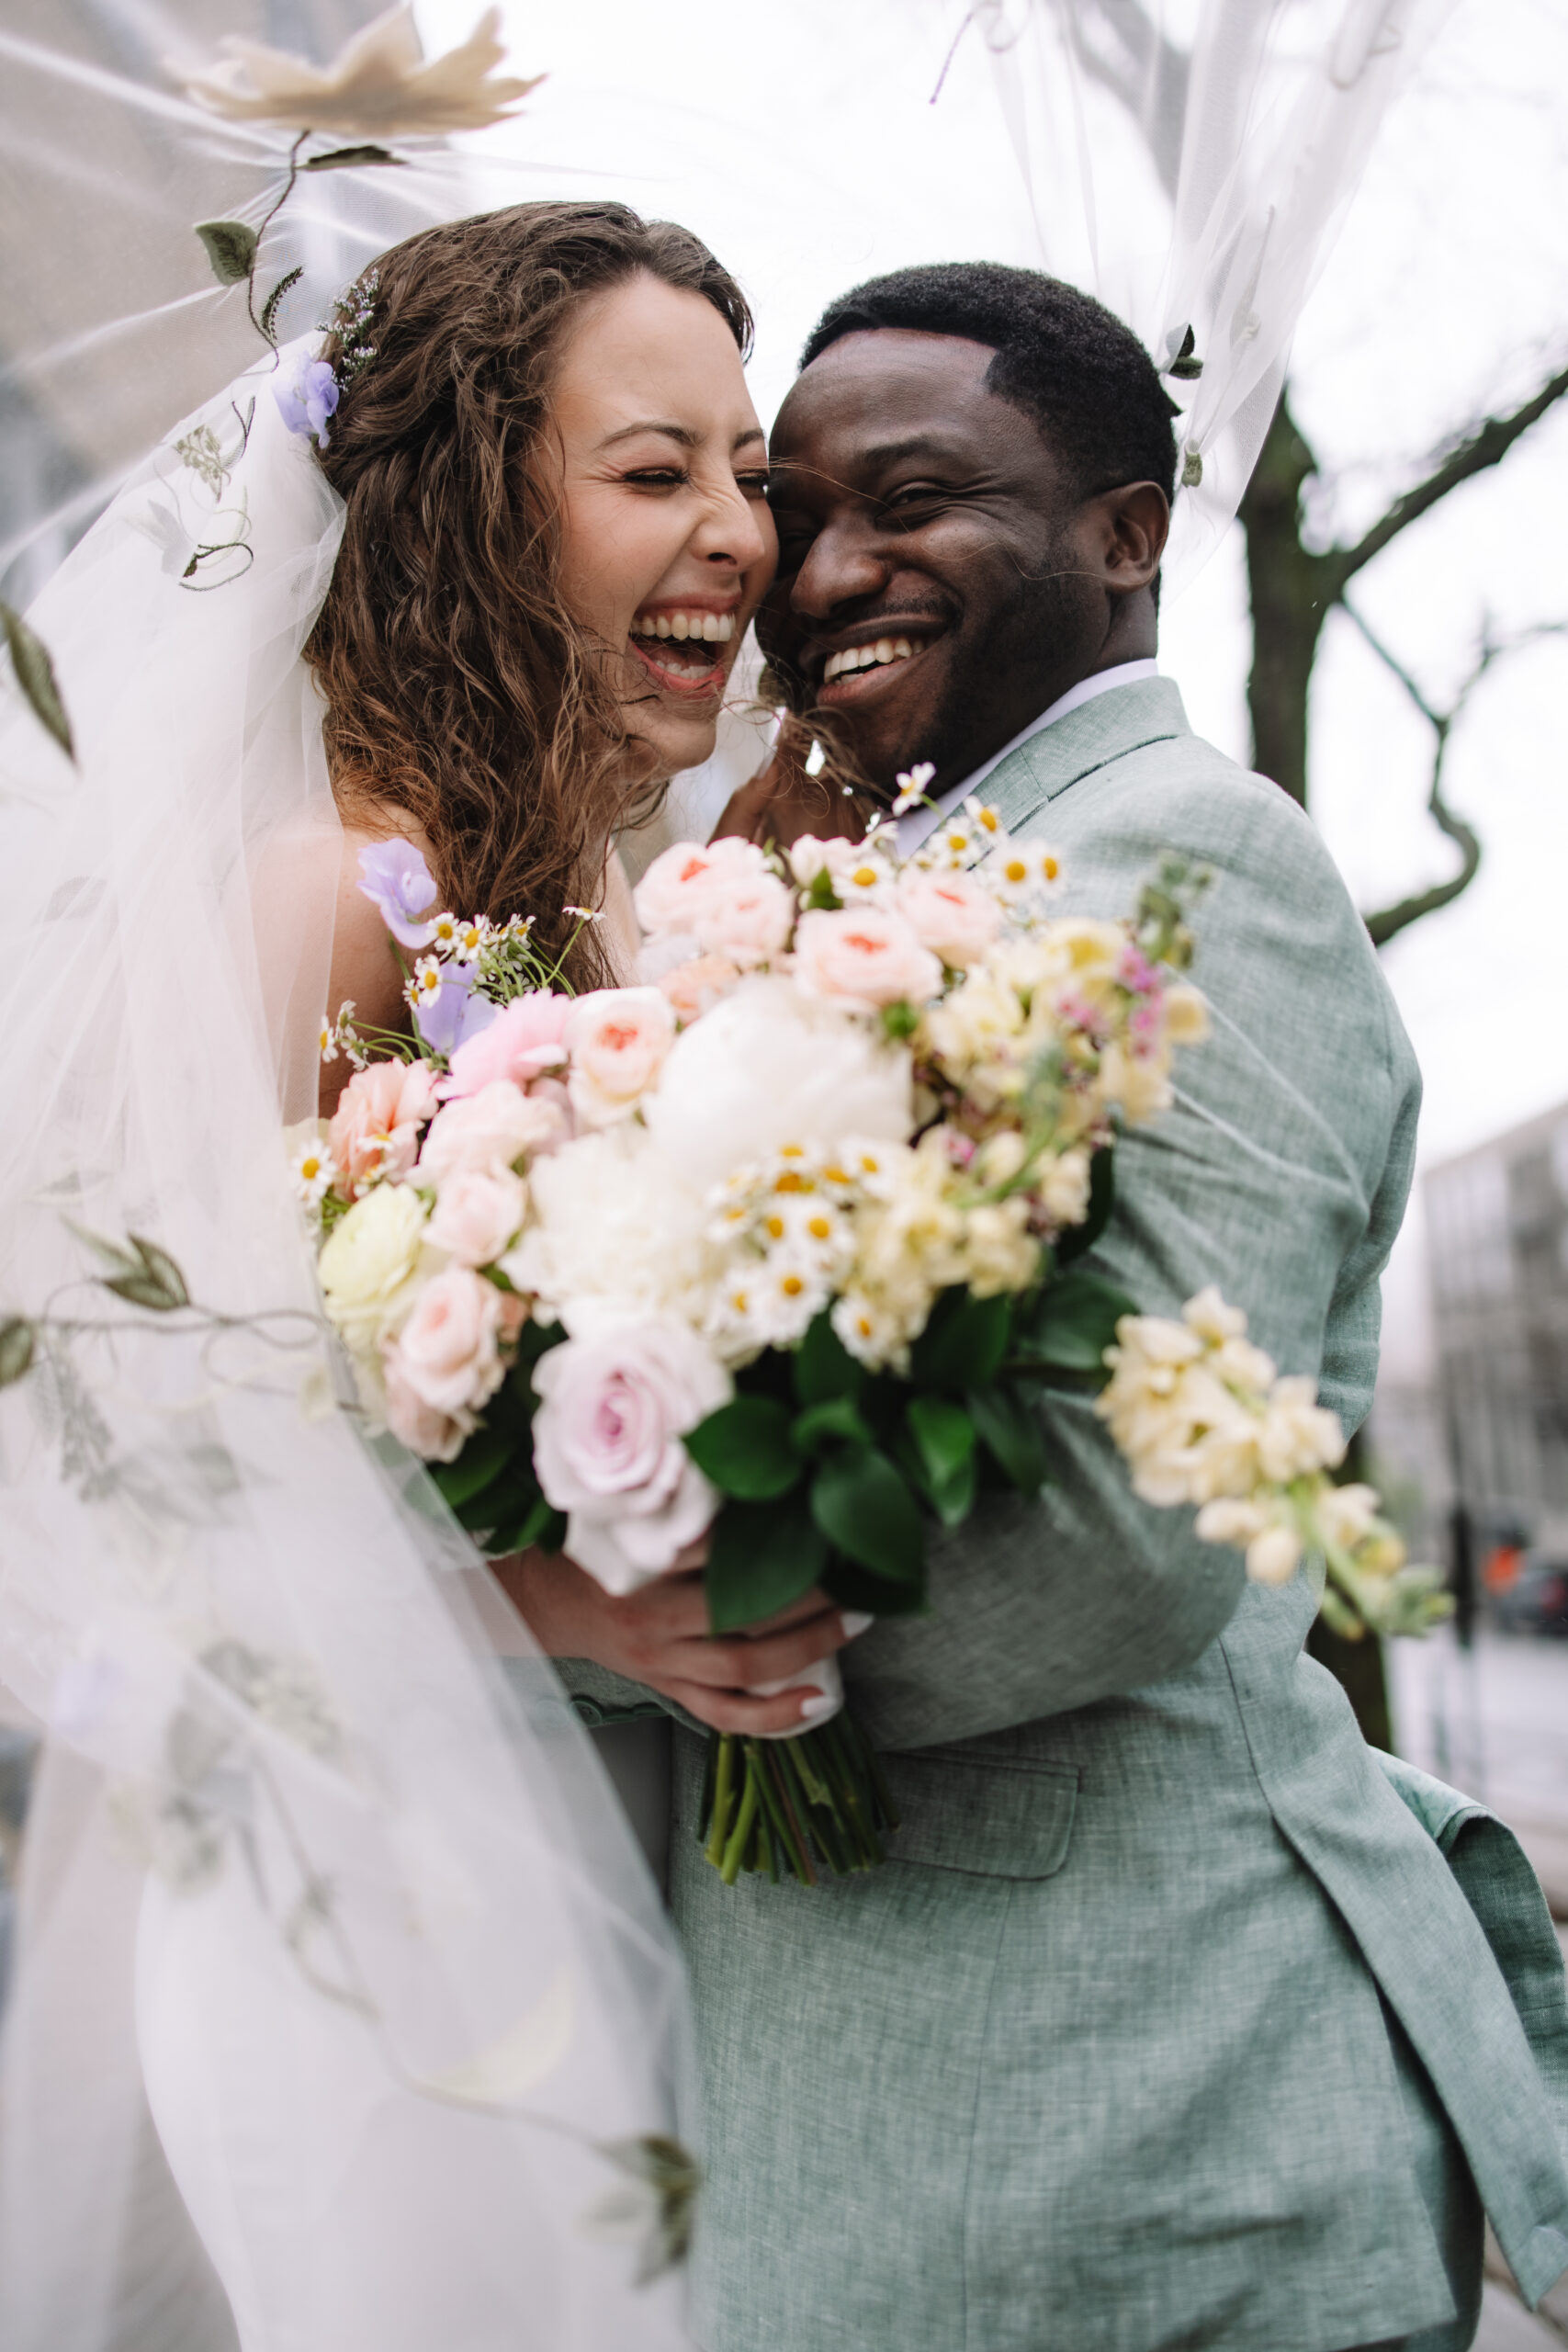 A bride and groom smile joyfully while embracing each other and holding a colorful bouquet of flowers.